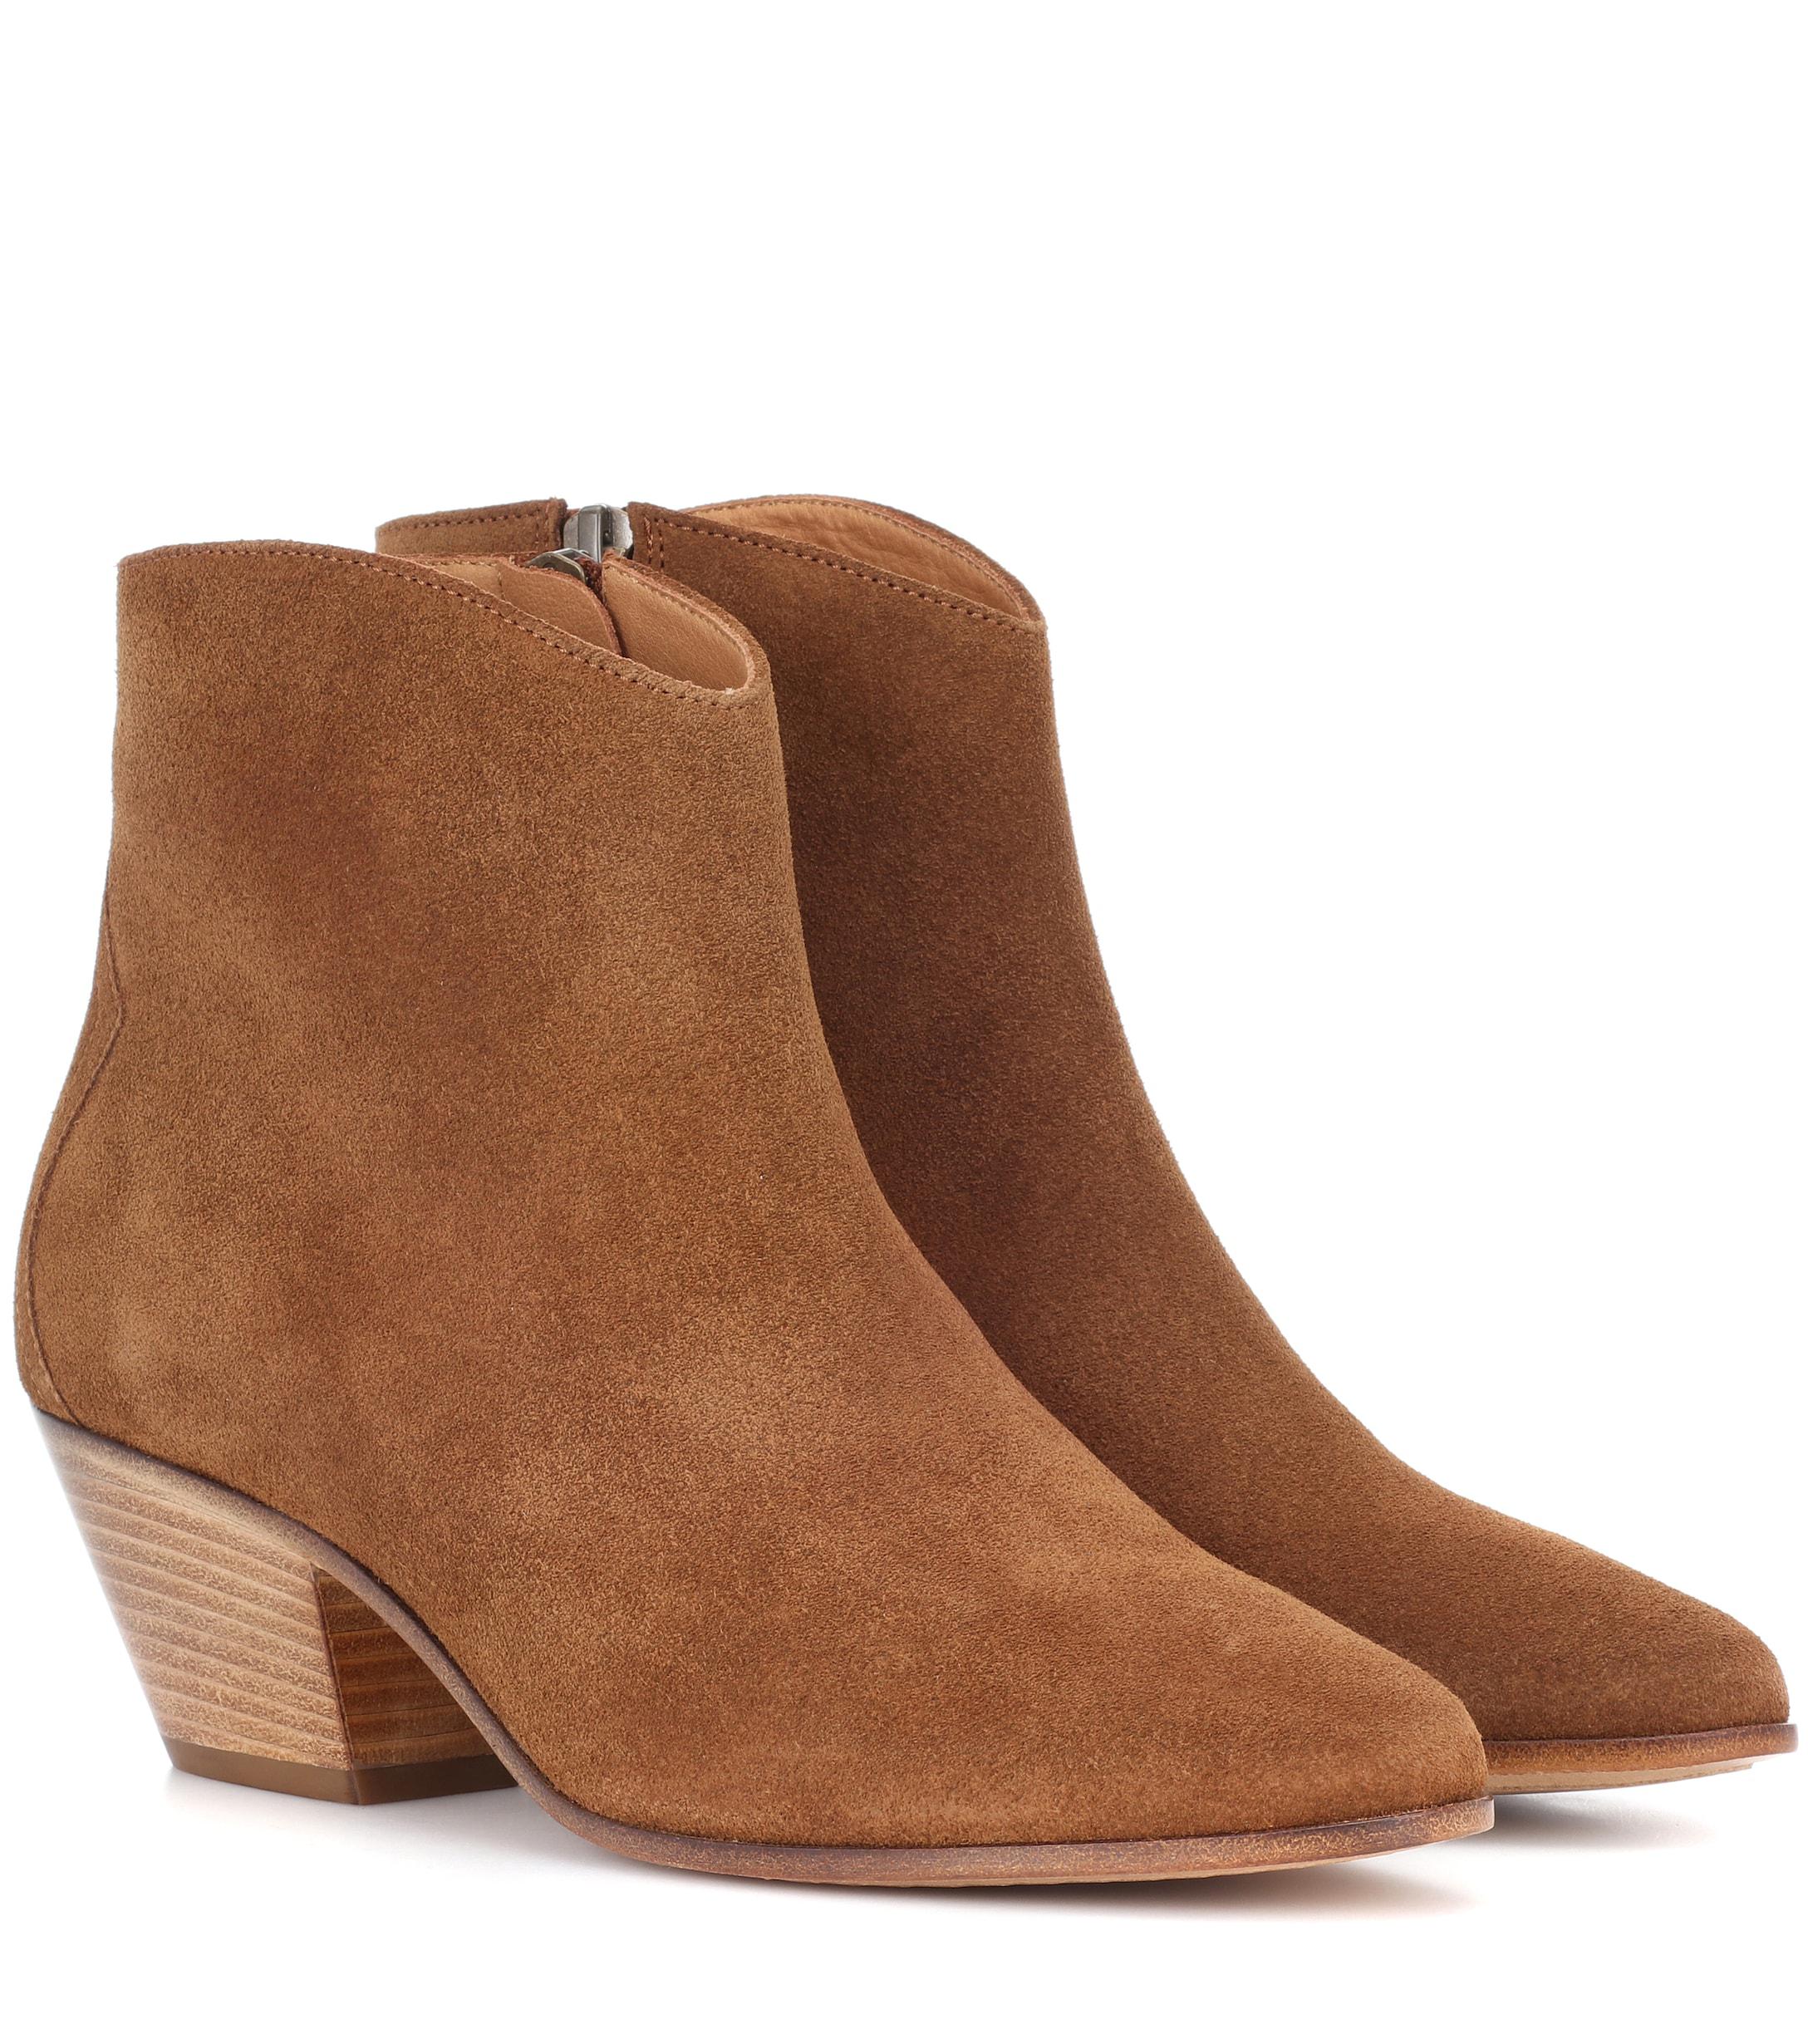 Isabel Marant Dacken Suede Ankle Boots in Brown - Lyst